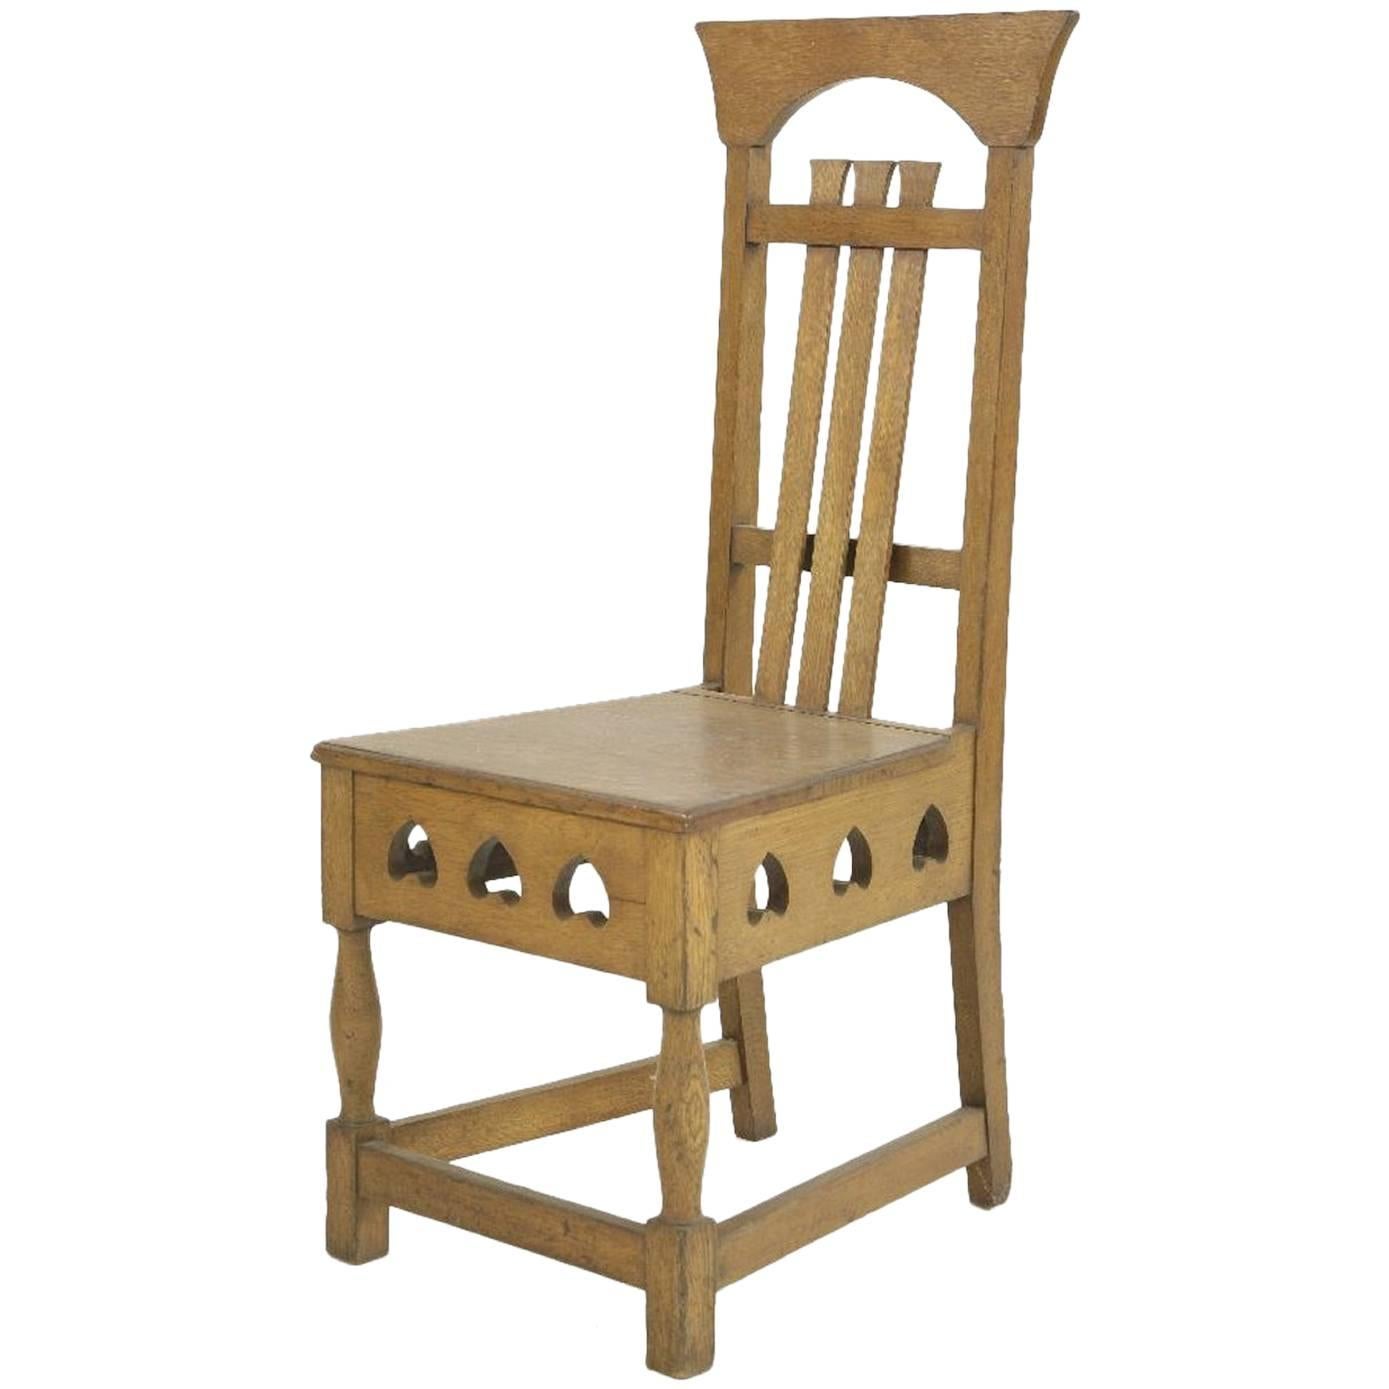 Shapland and Petter Arts & Crafts Oak Chair in the Style of M H Baillie Scott